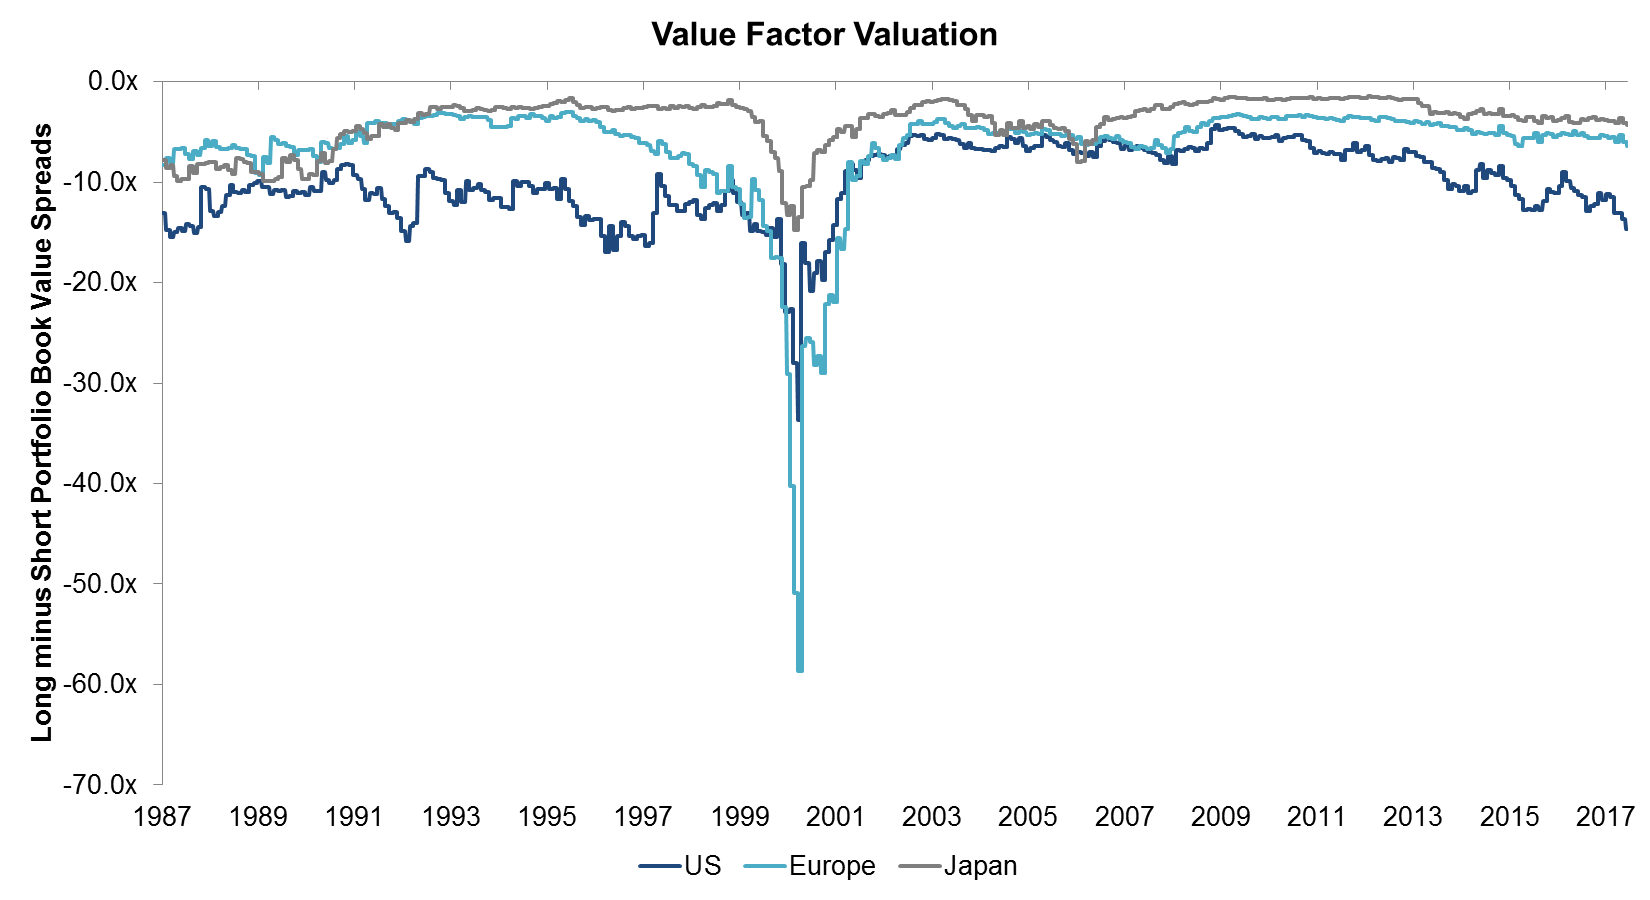 Value Factor Valuation